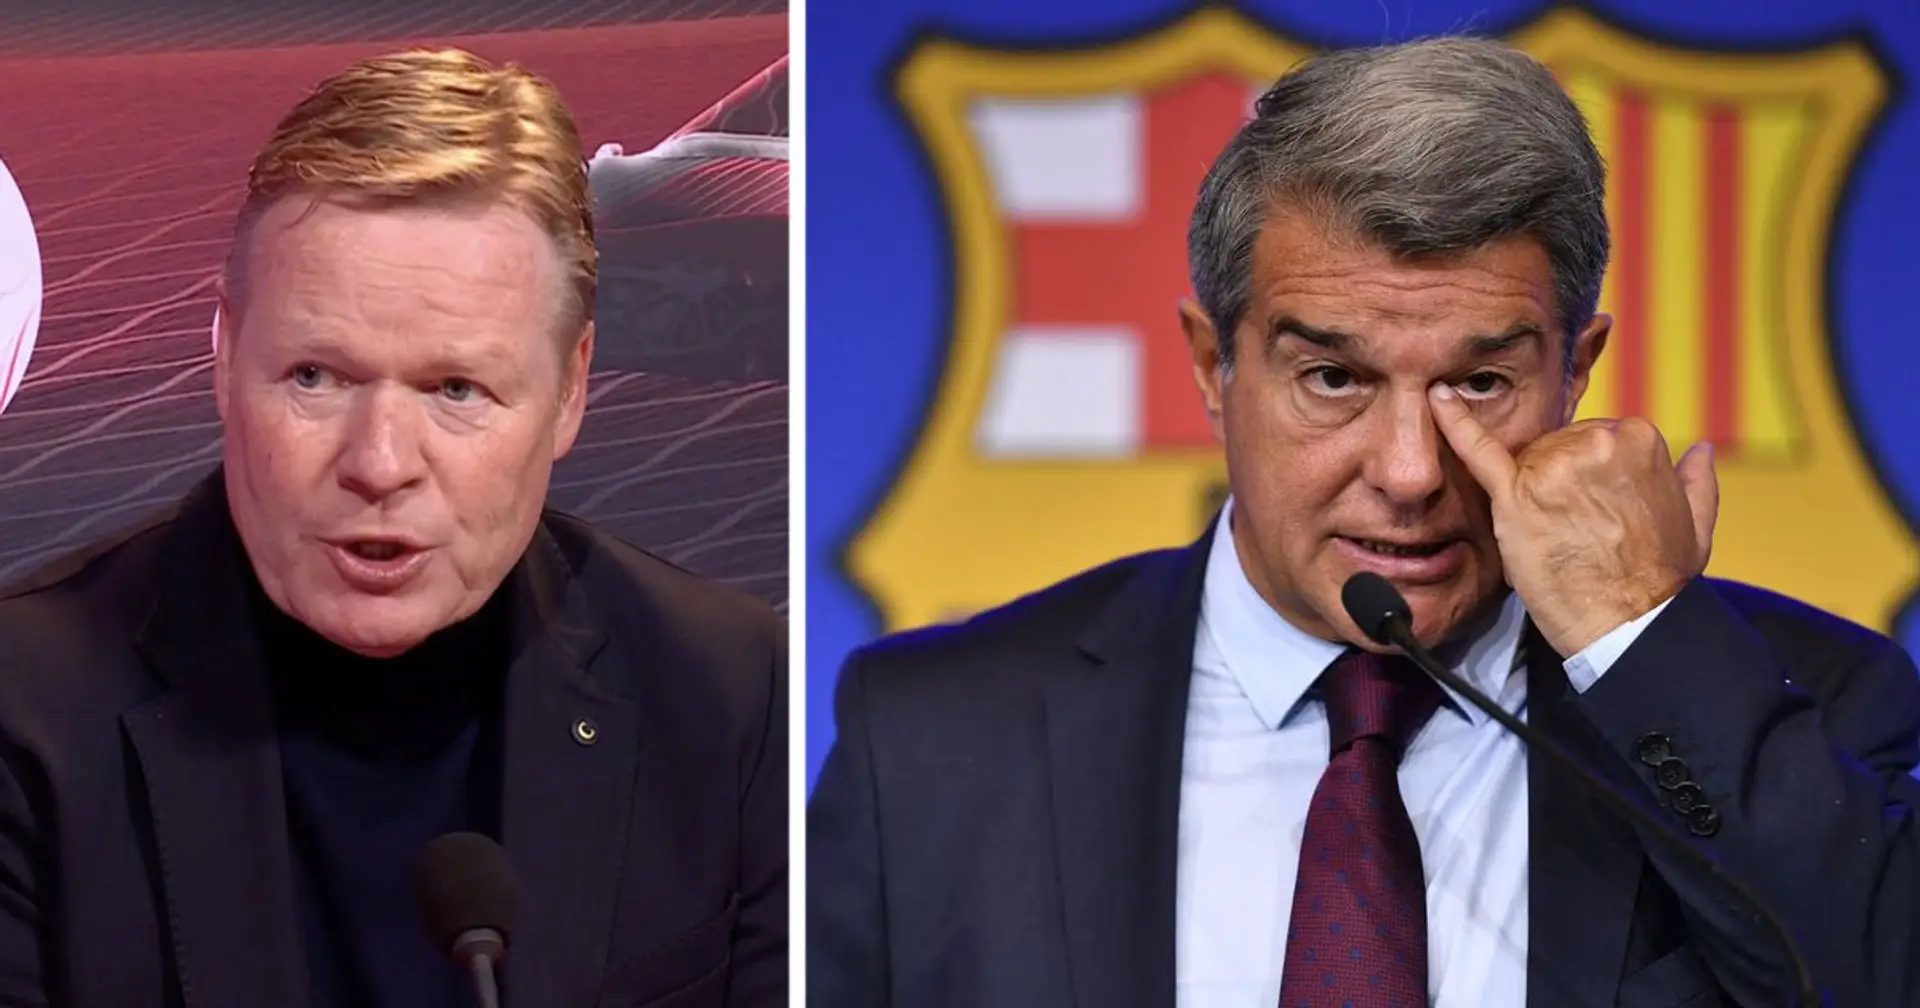 'Now that was unfair!': Koeman names one way Laporta mistreated him